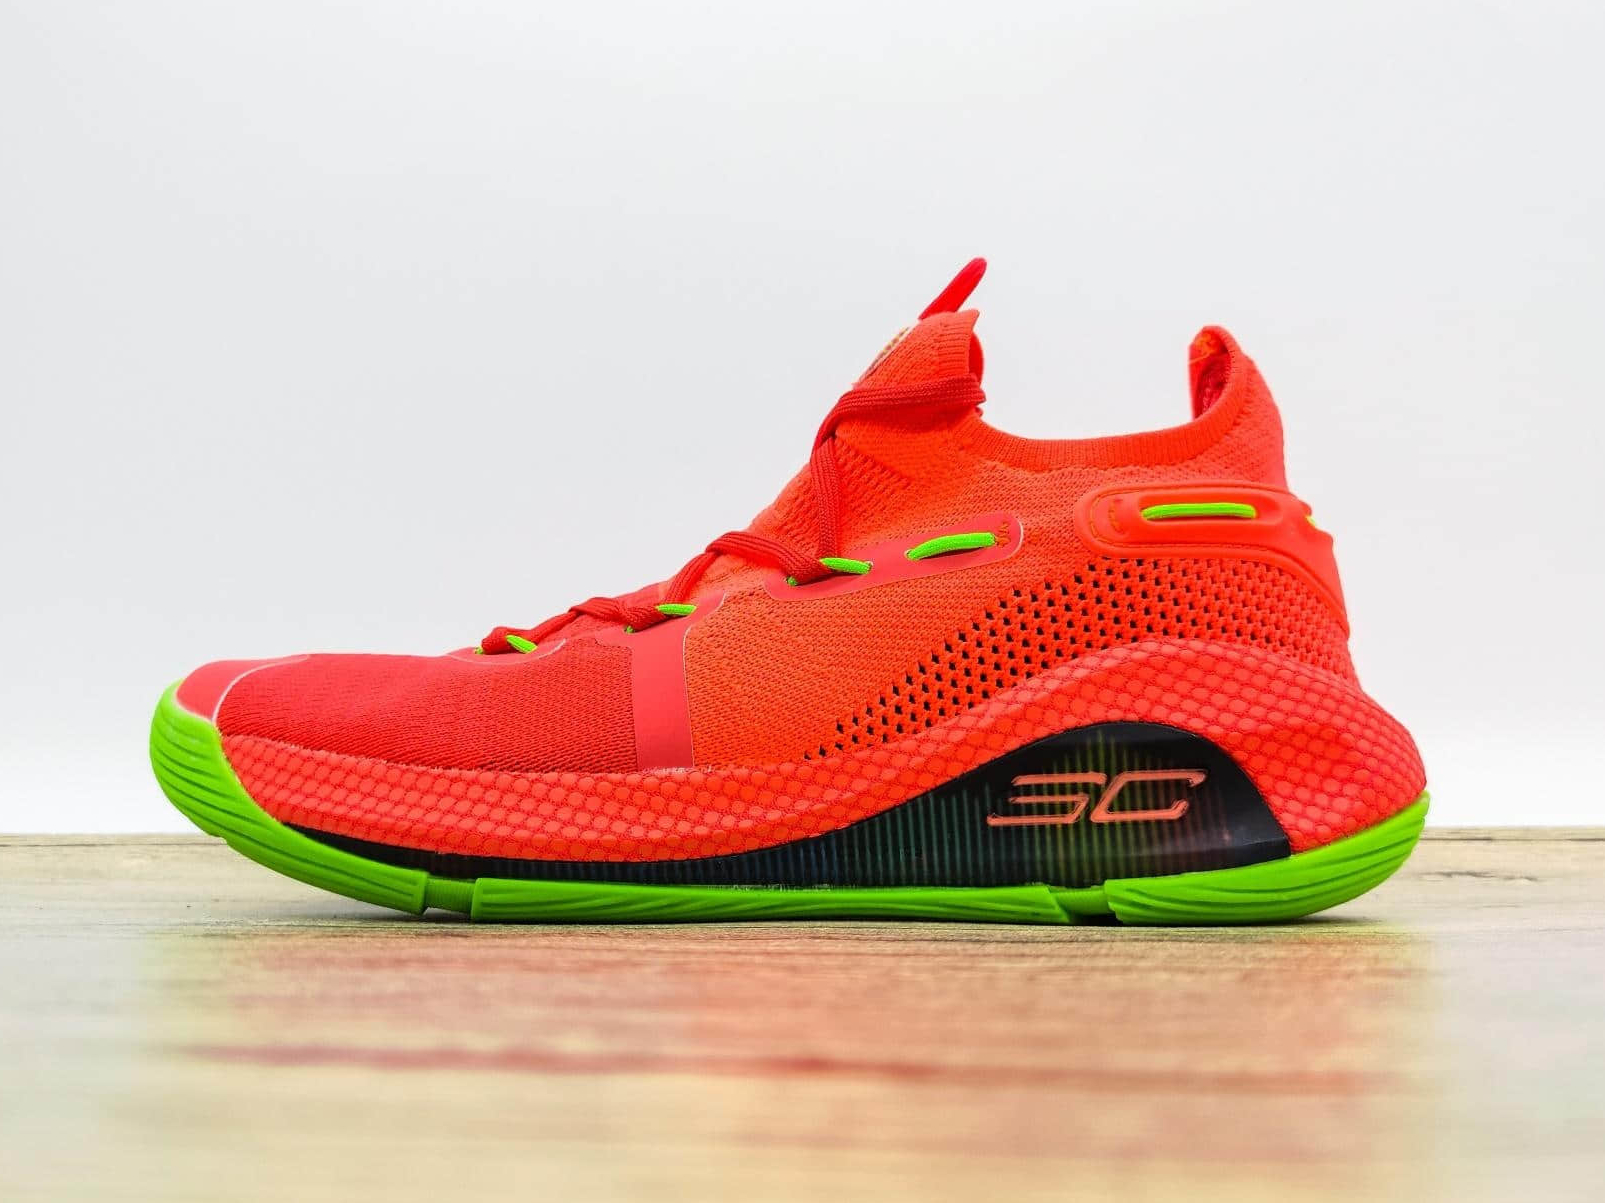 Under Armour Curry 6 'Fox Theater' 3020612-004 - Premium Basketball Shoes